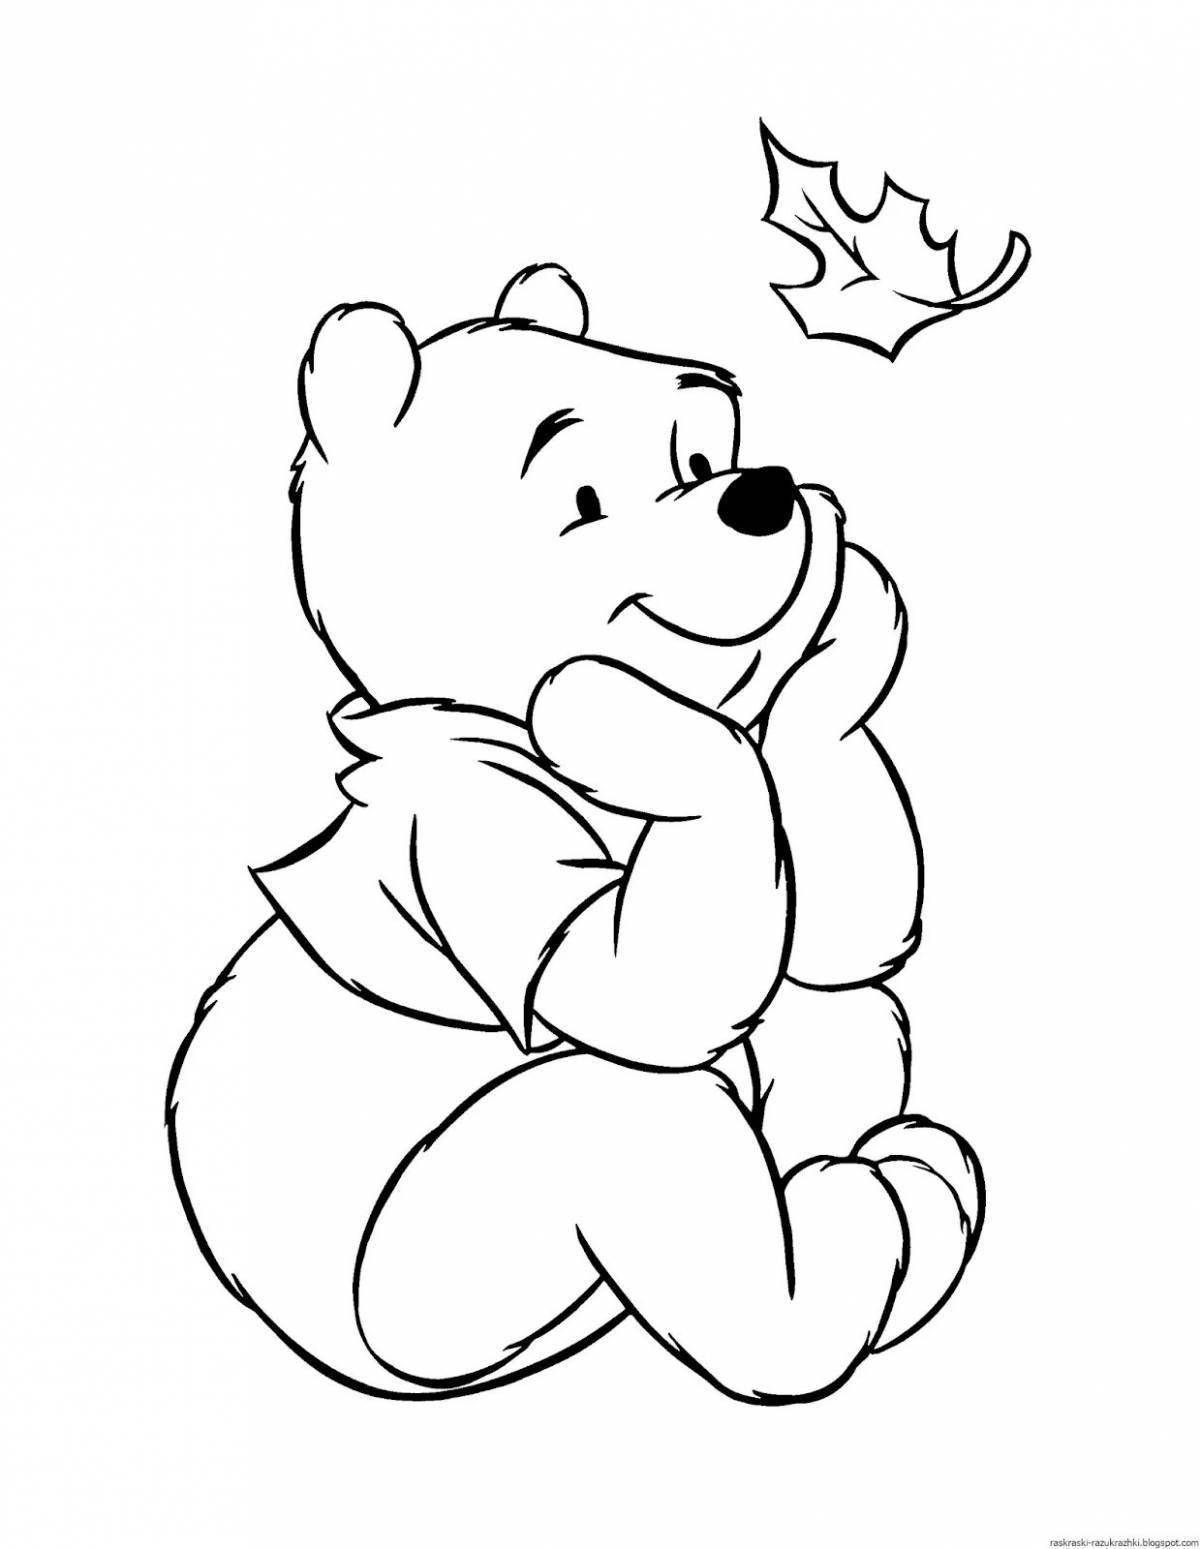 Cute black and white children's coloring book